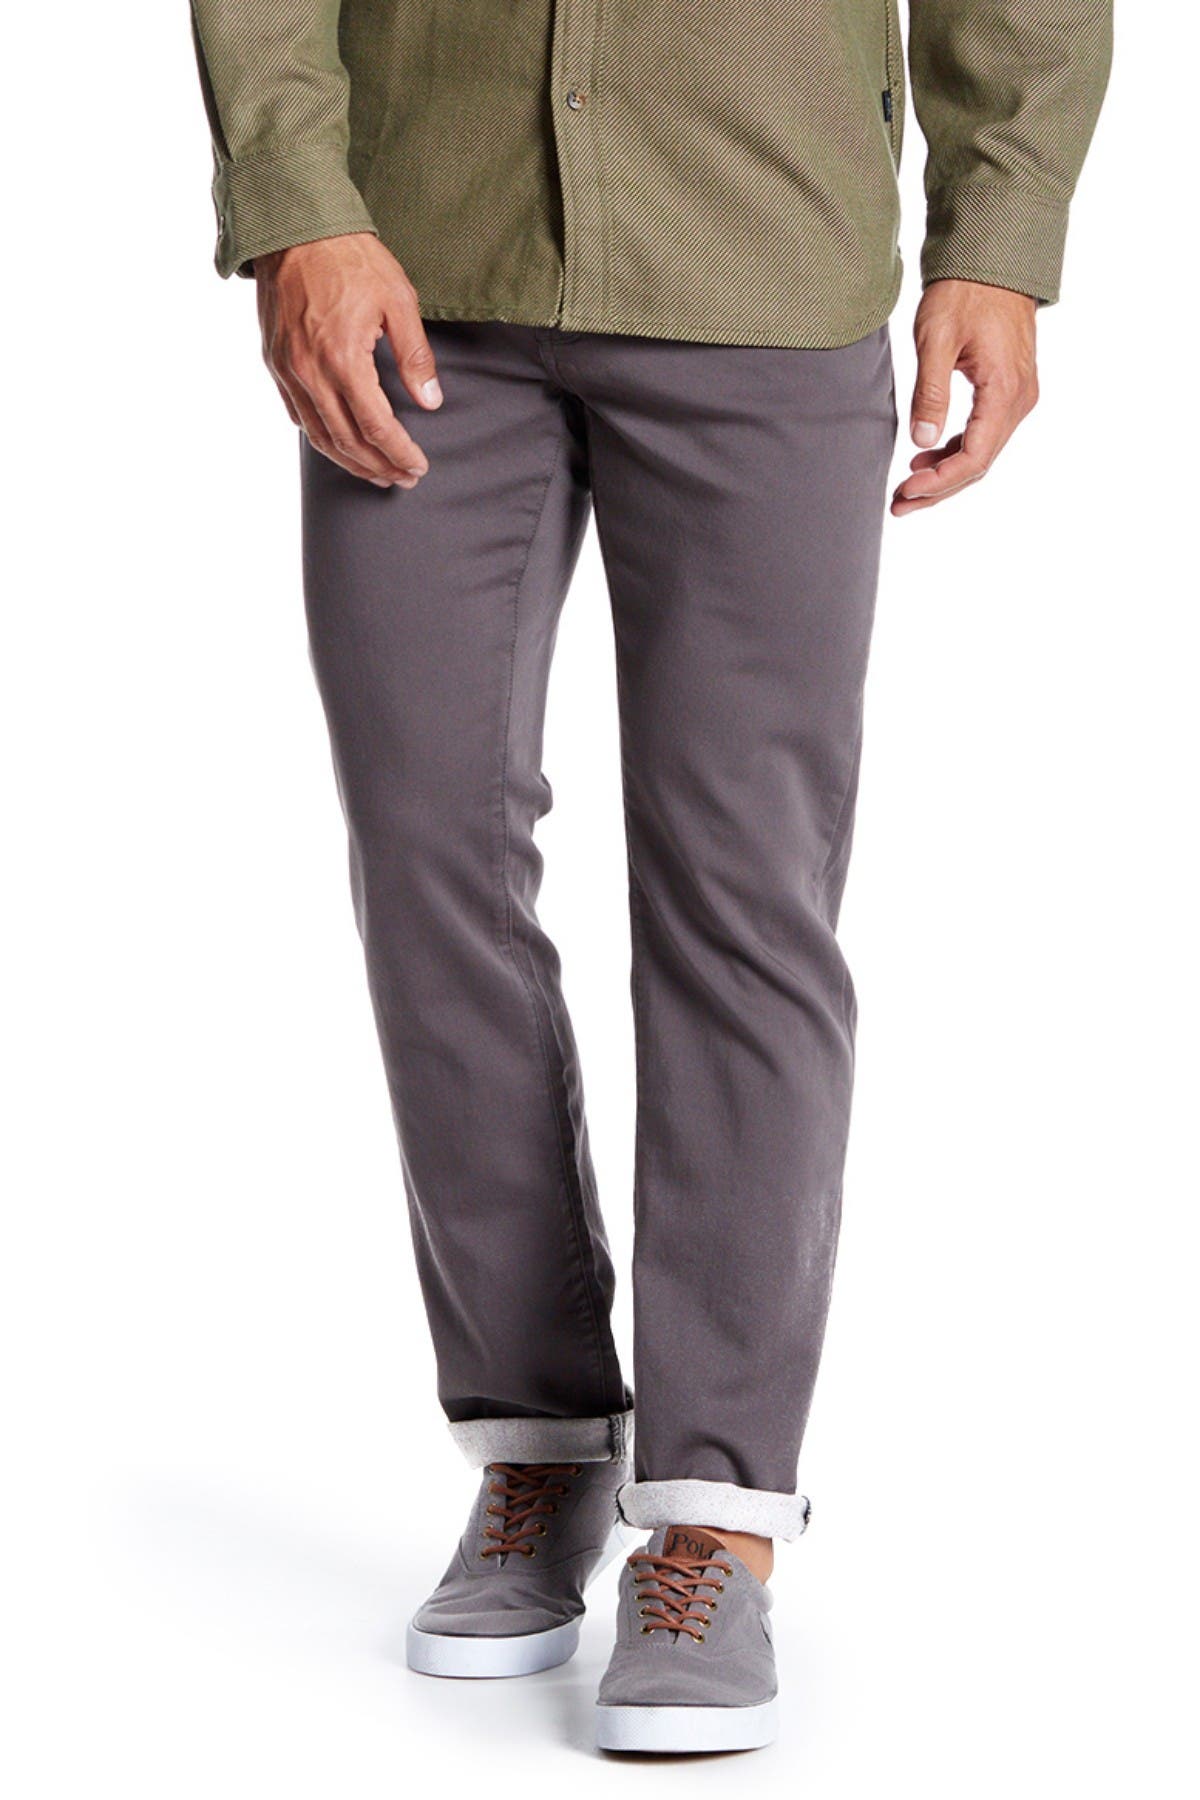 discount 63% Black MEN FASHION Trousers Straight Selected Chino trouser 